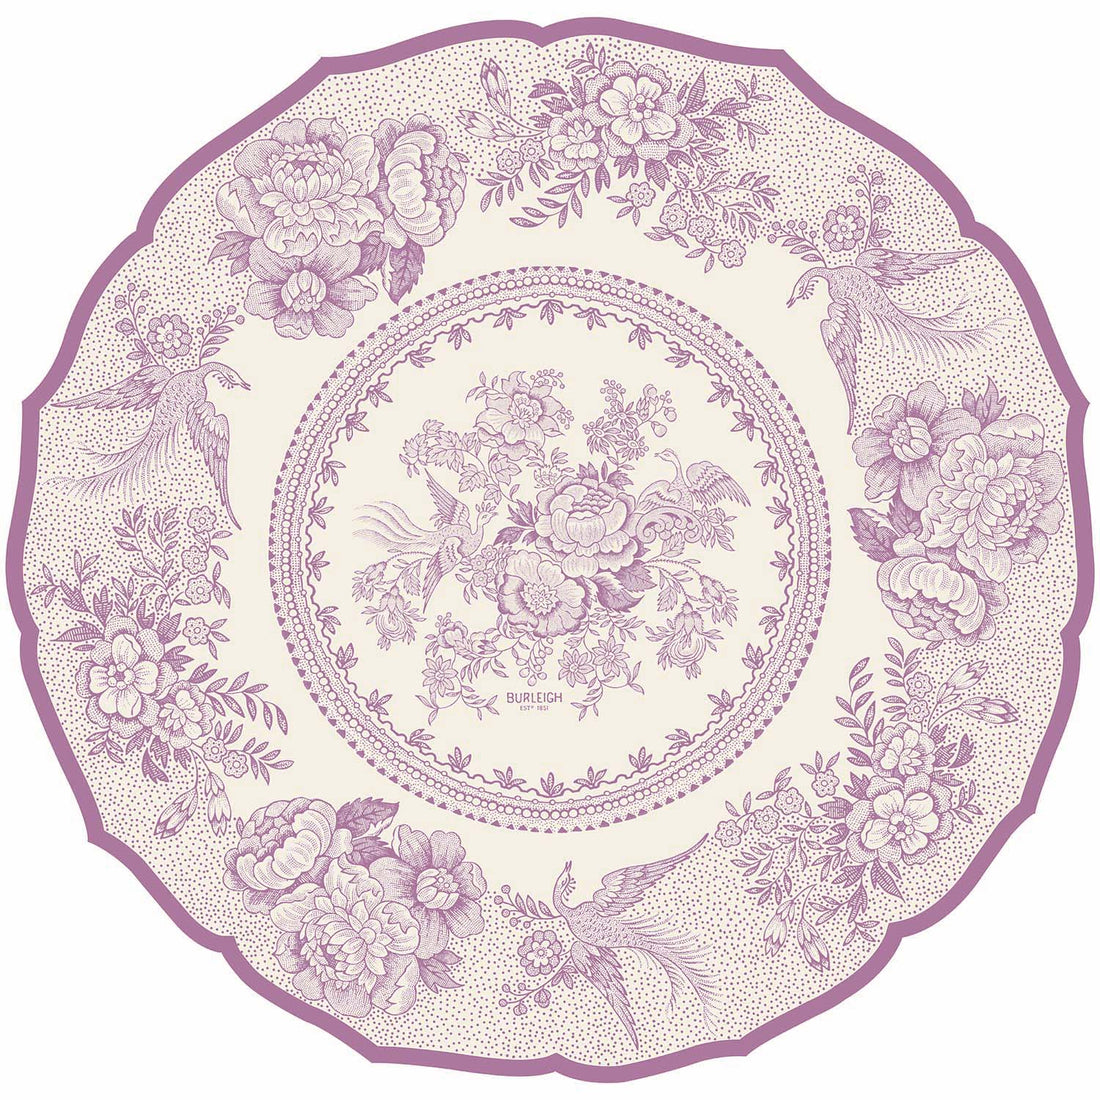 A round design with a scalloped edge, resembling a vintage plate with lilac purple linework of flowers and birds on a white background.ans plate, from above.